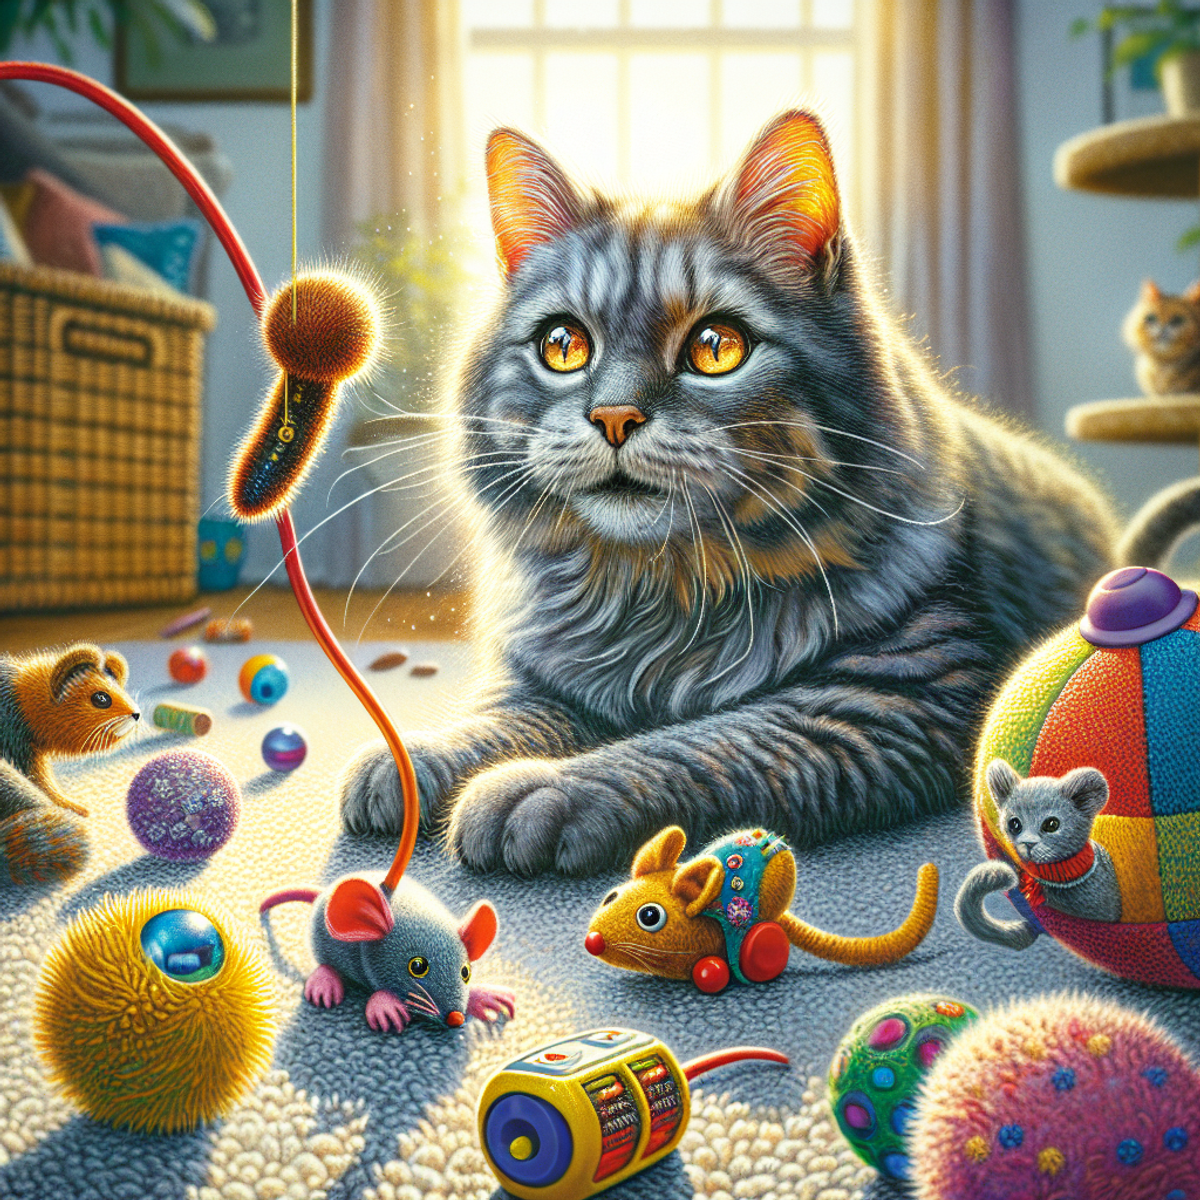 An elderly grey cat with amber eyes playing joyfully with various toys, including plushies, balls with bells, and a motorized toy bug, in natural ligh